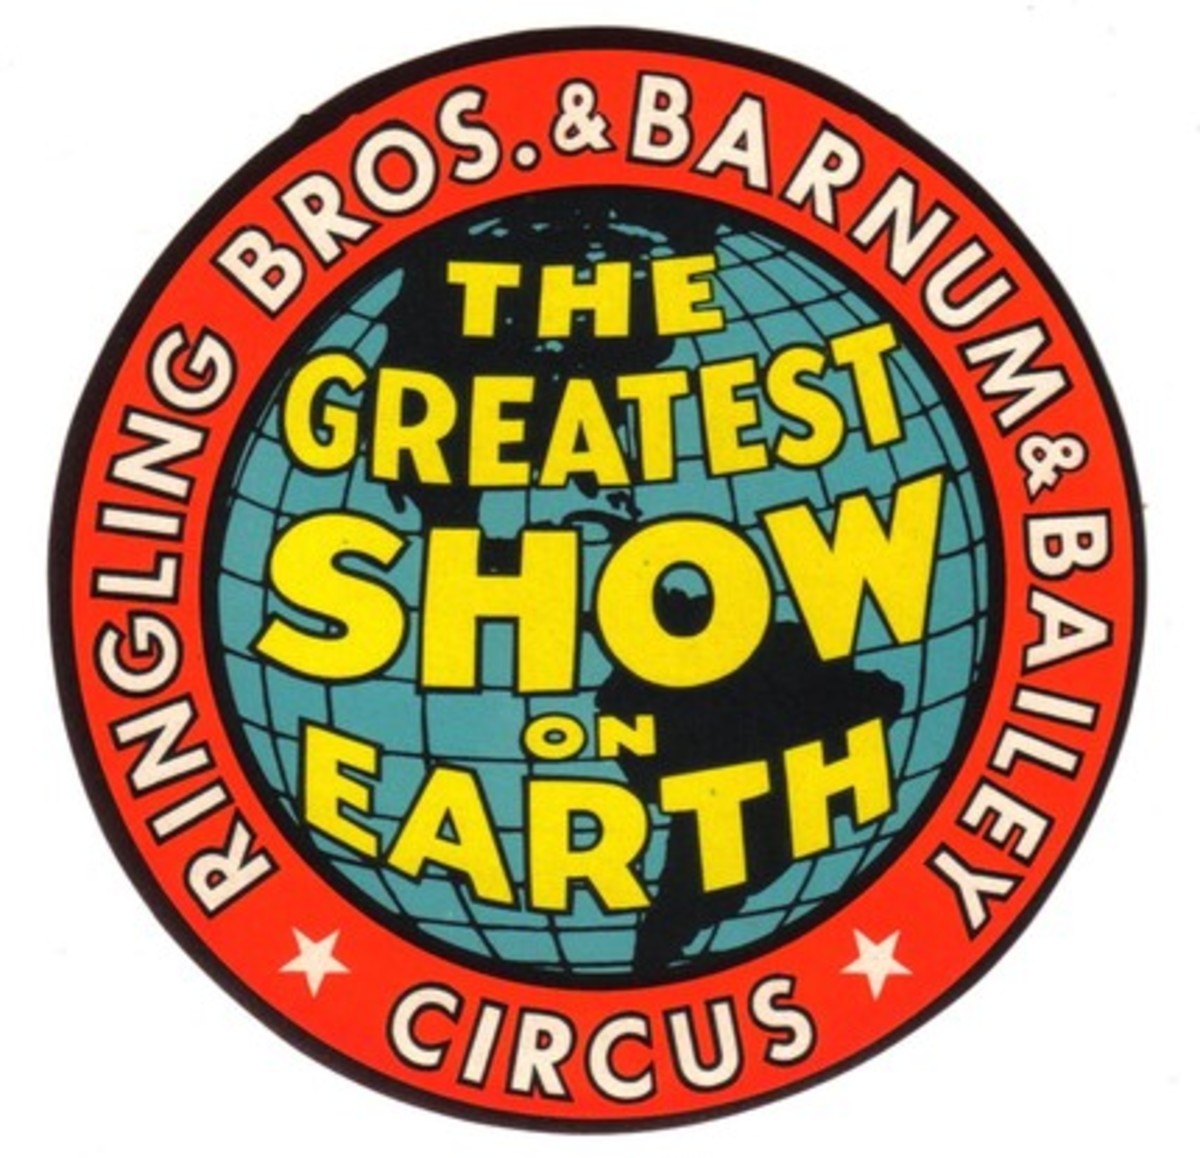 The Demise of Ringling Bros. and Barnum & Bailey